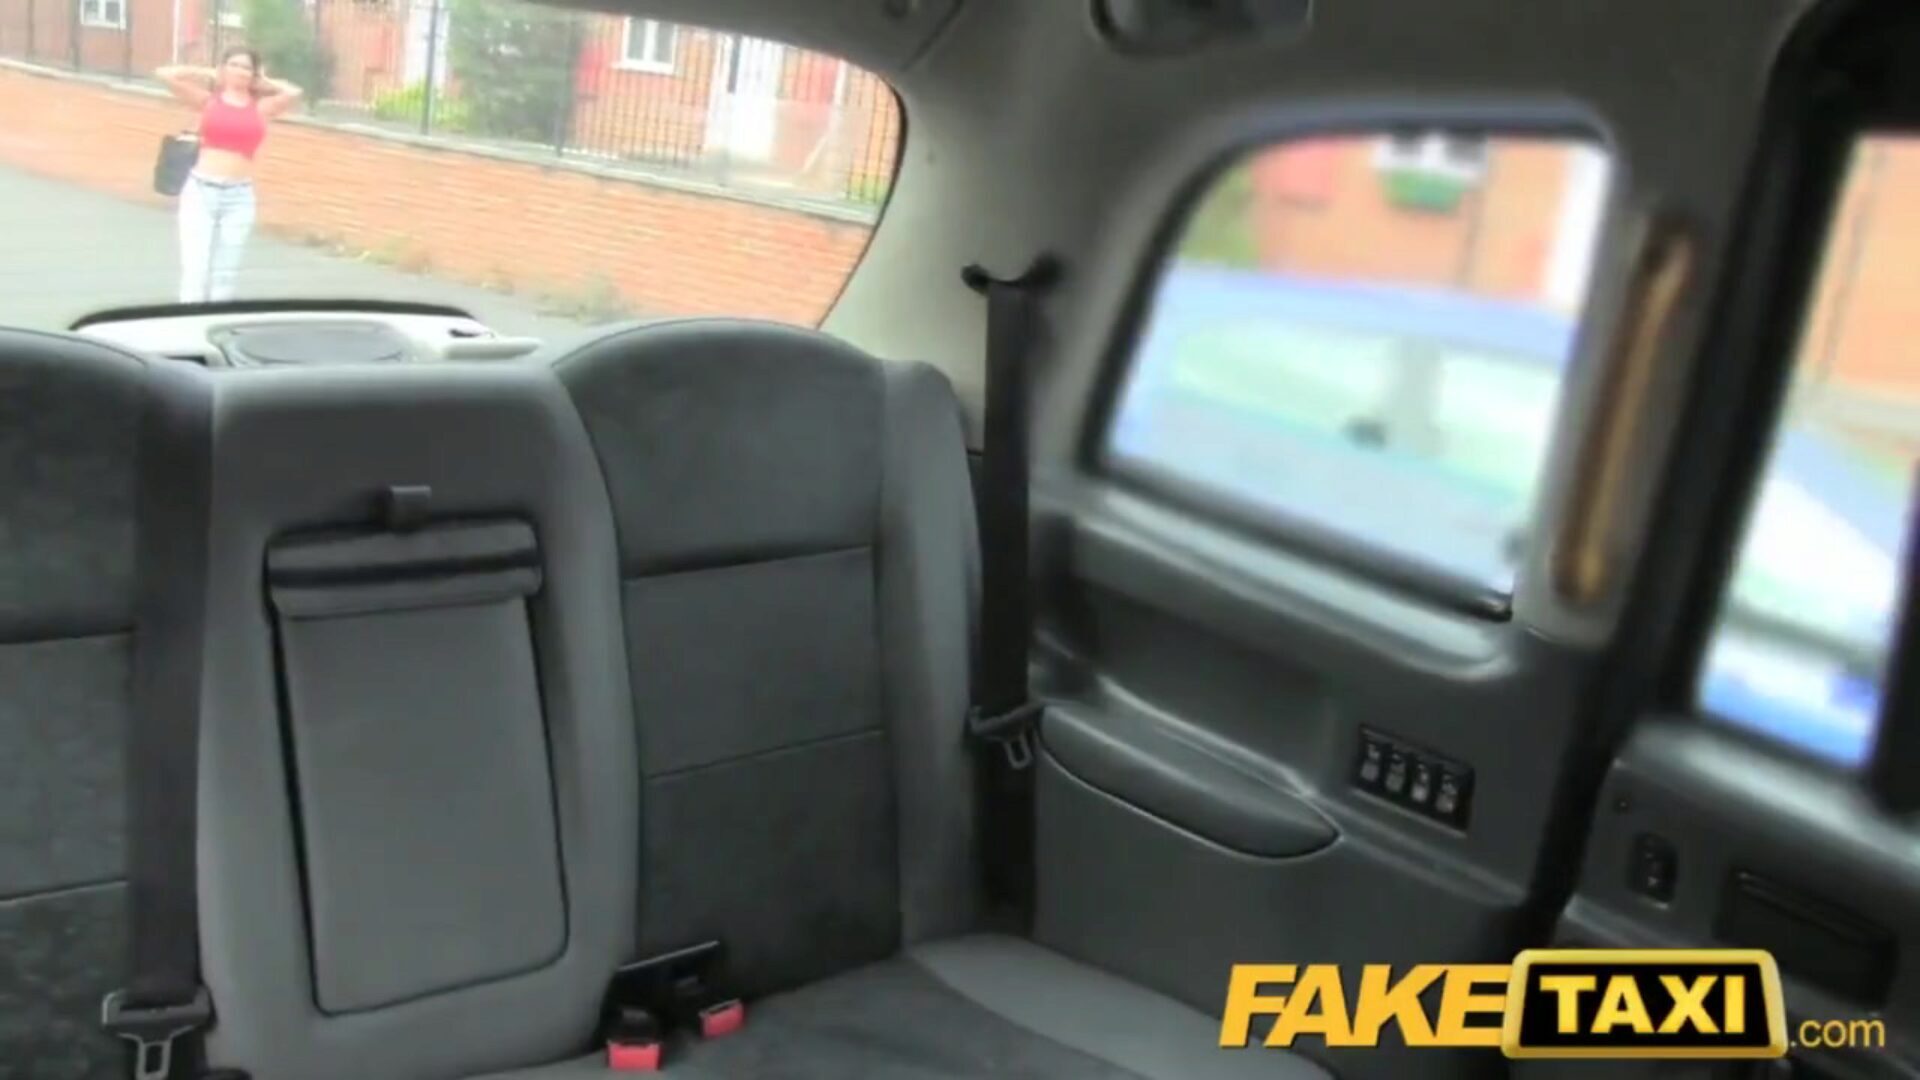 Fake Taxi but each Sound is from Minecraft